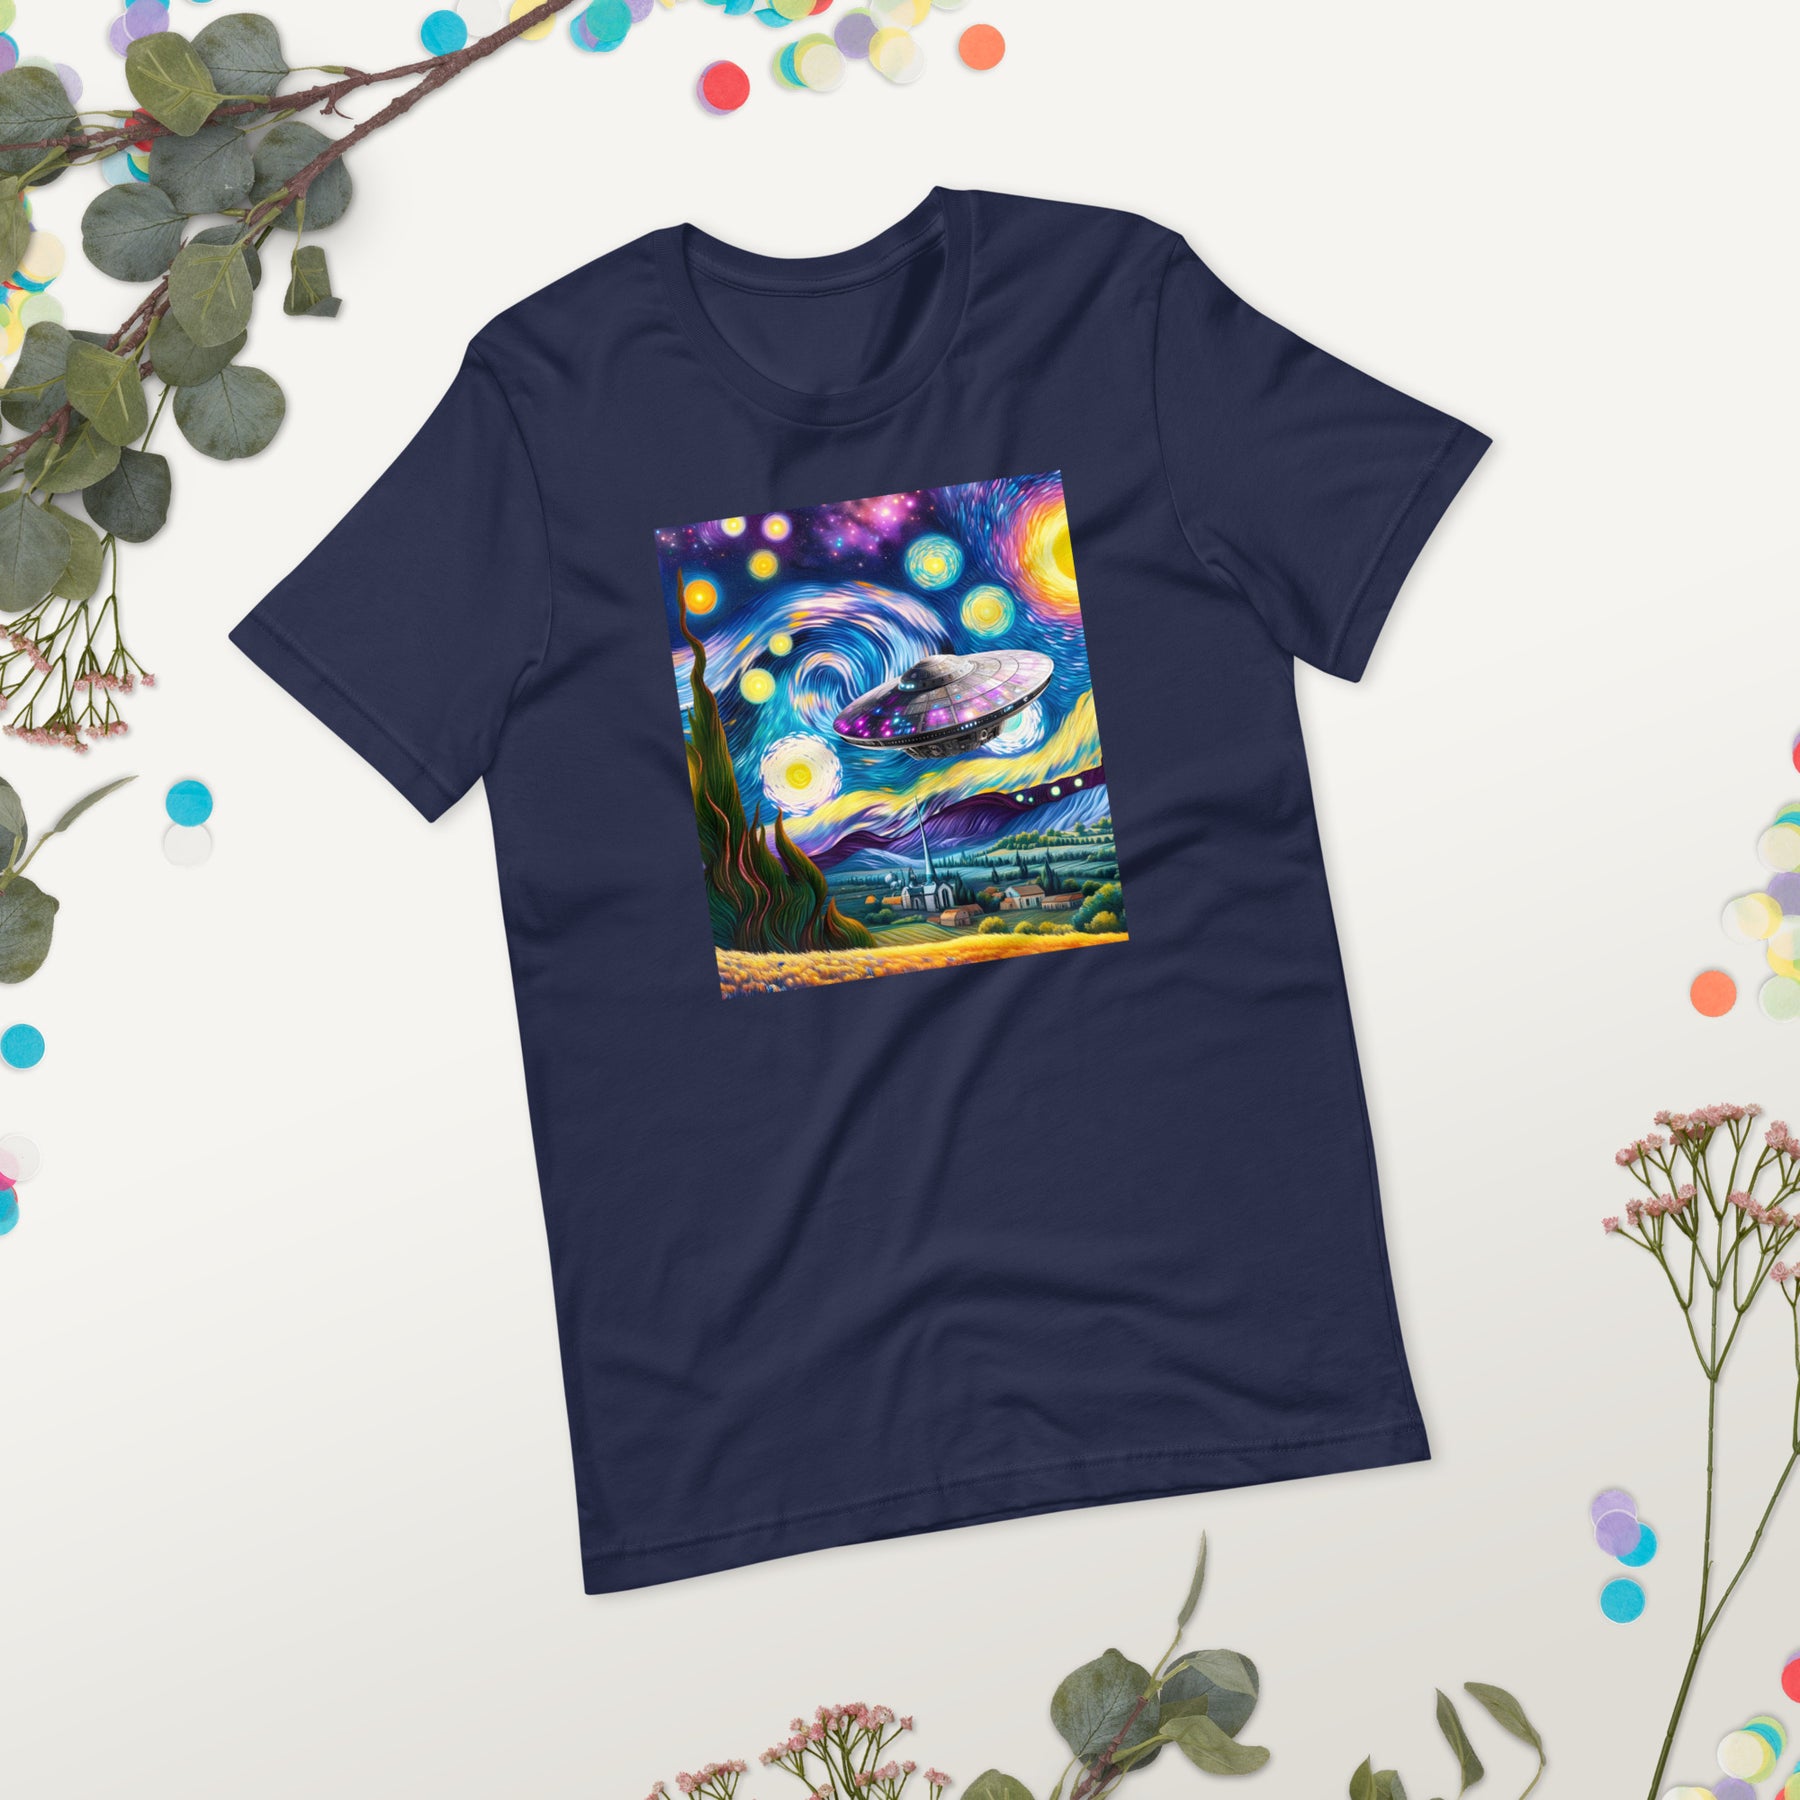 Spaceship UFO Shirt, Van Gogh-Inspired- Alien Invasion Tee, Galaxy & Conspiracy Theme, Funny Gift for Sci-Fi Fans